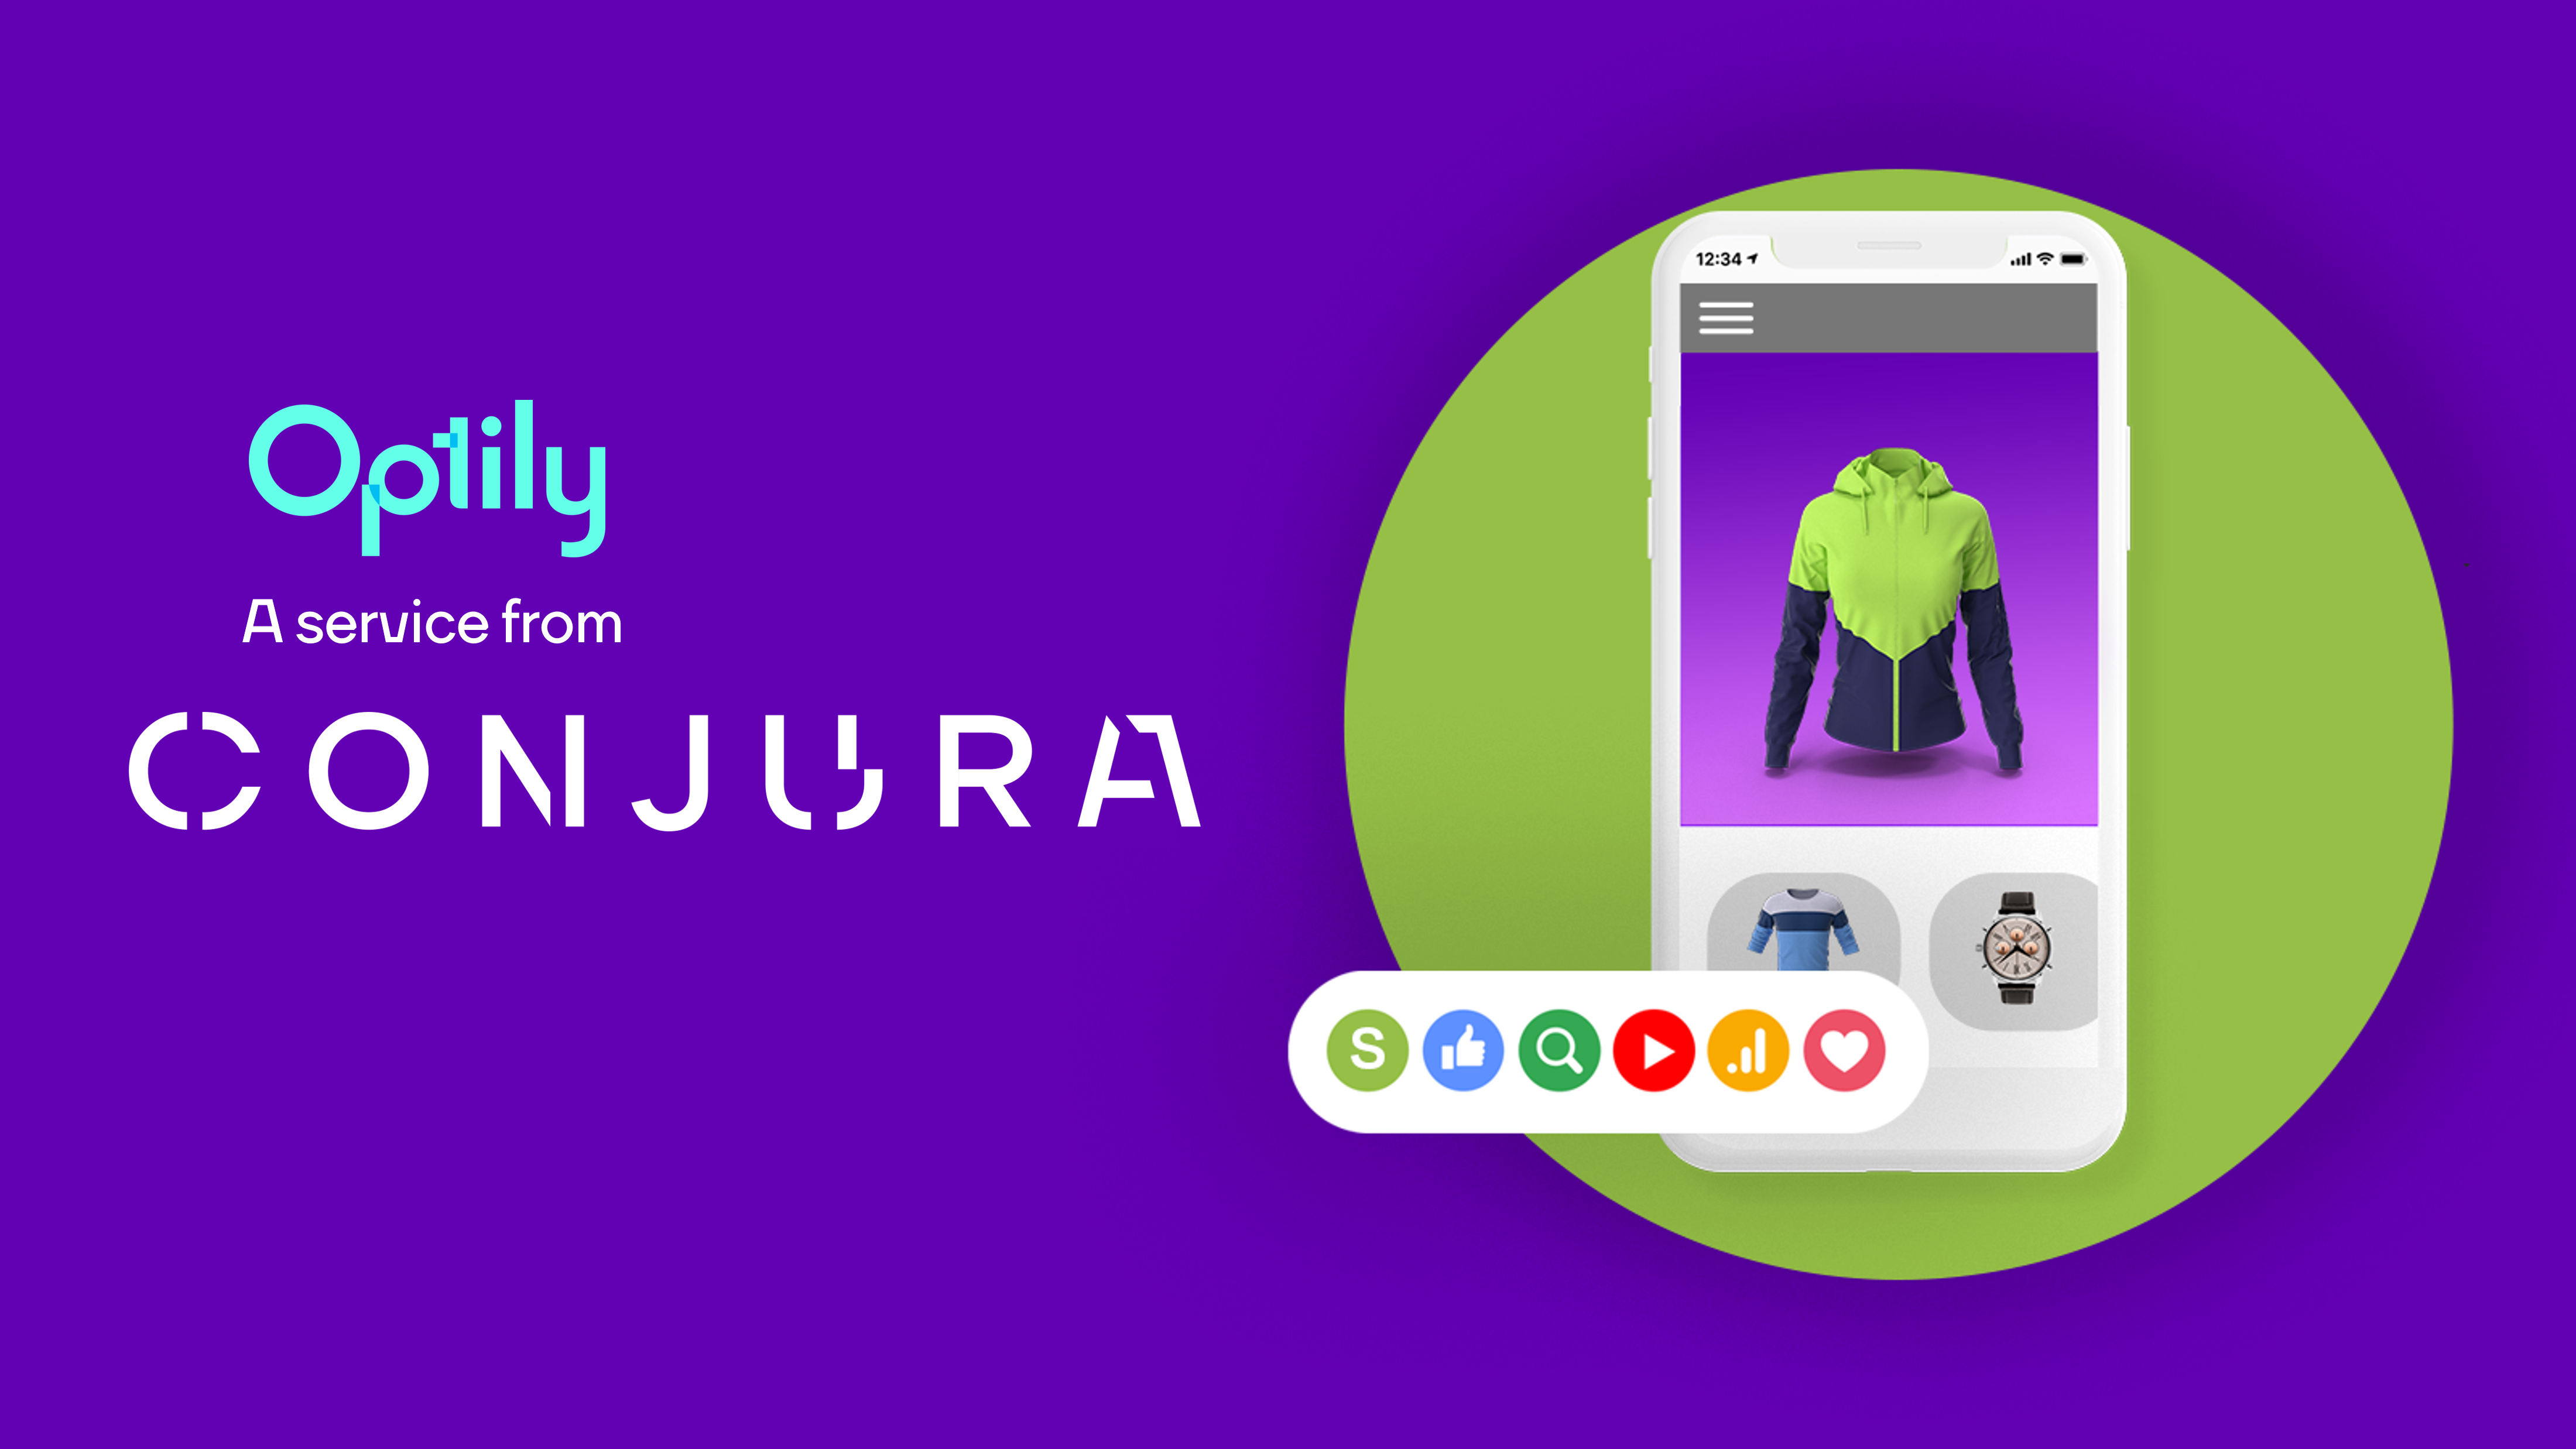 Conjura Acquires Optily: A Milestone for Irish Innovation in Global eCommerce